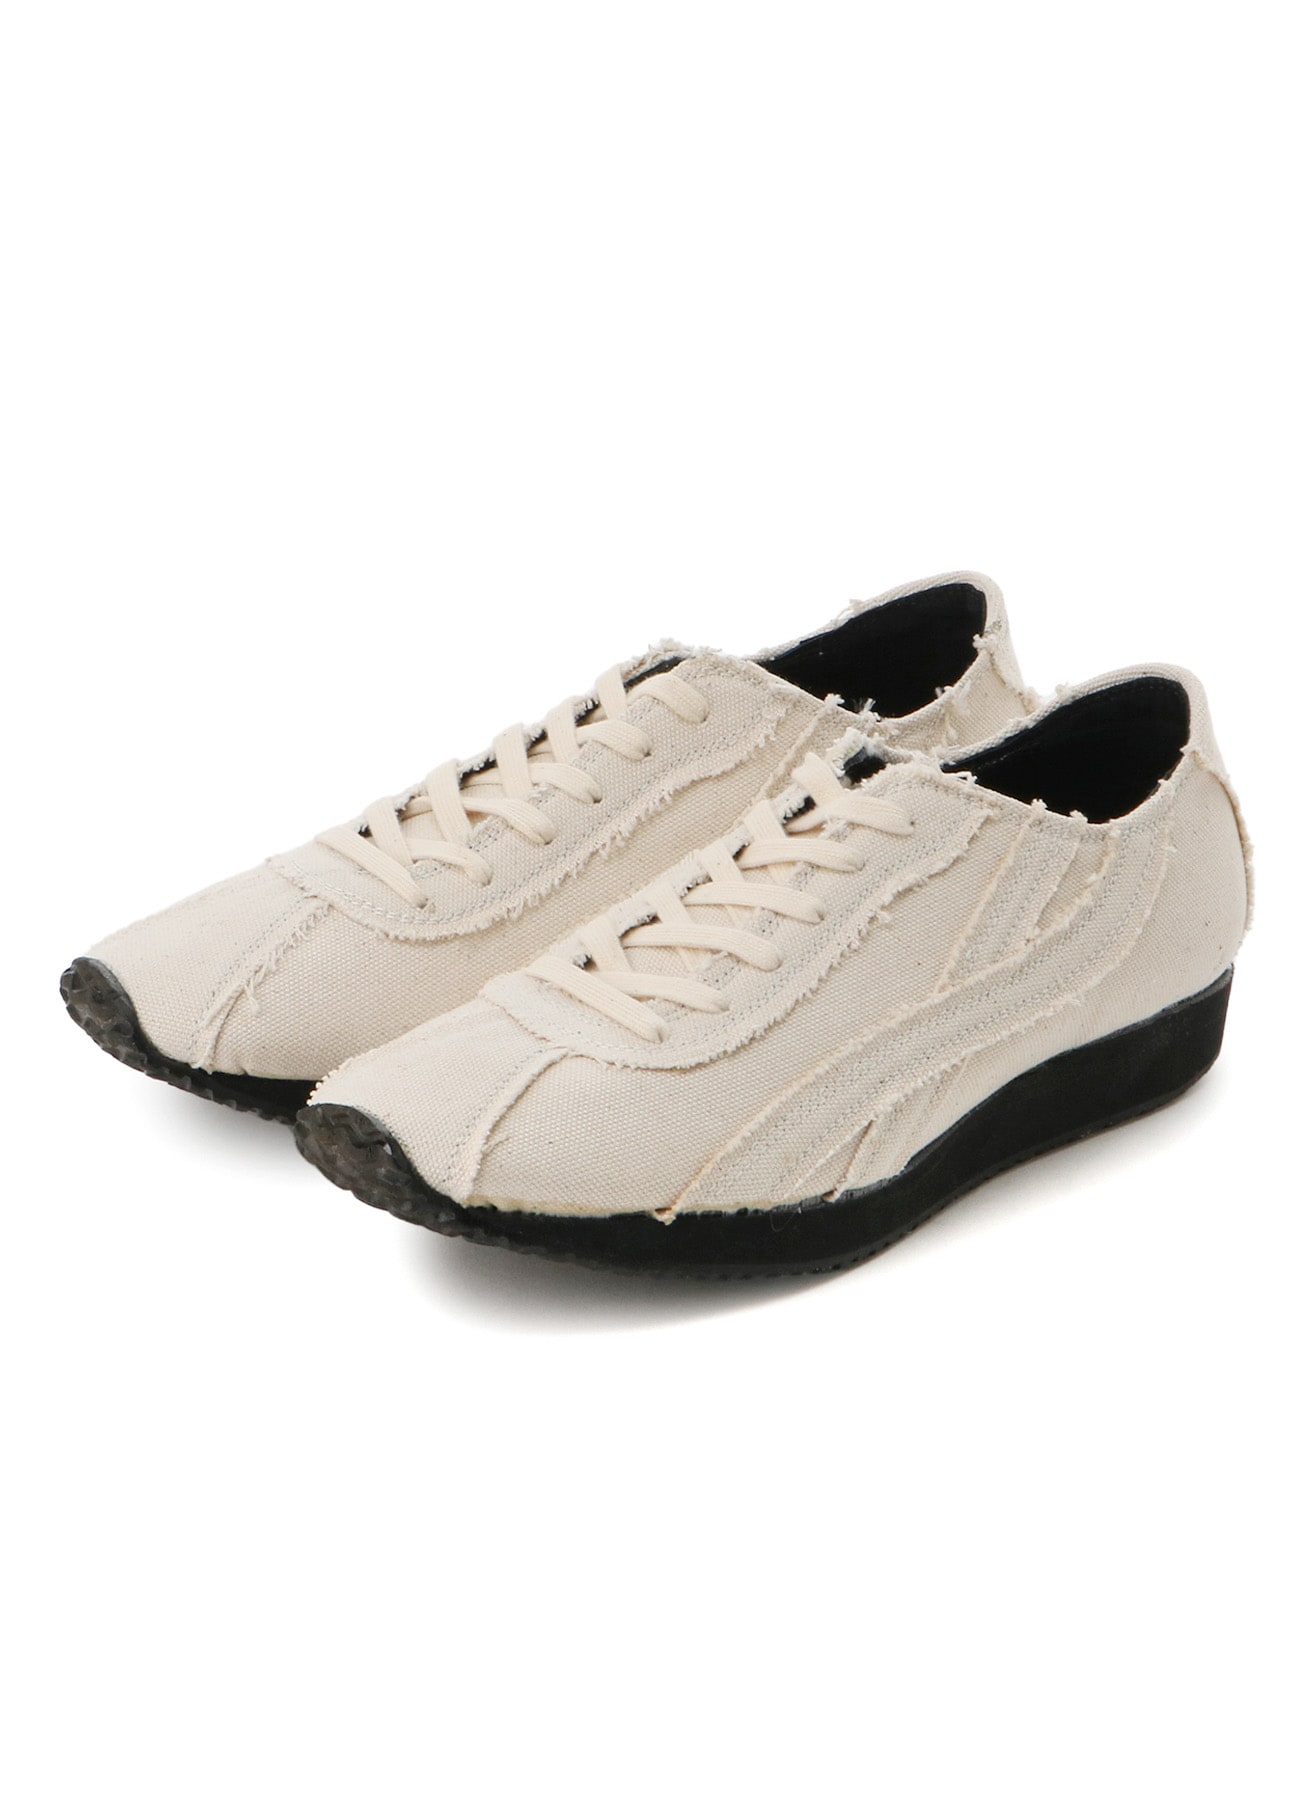 NO.8 CANVAS CUTOFF XLINE RUNNING SHOES(27cm Ivory): Vintage｜THE